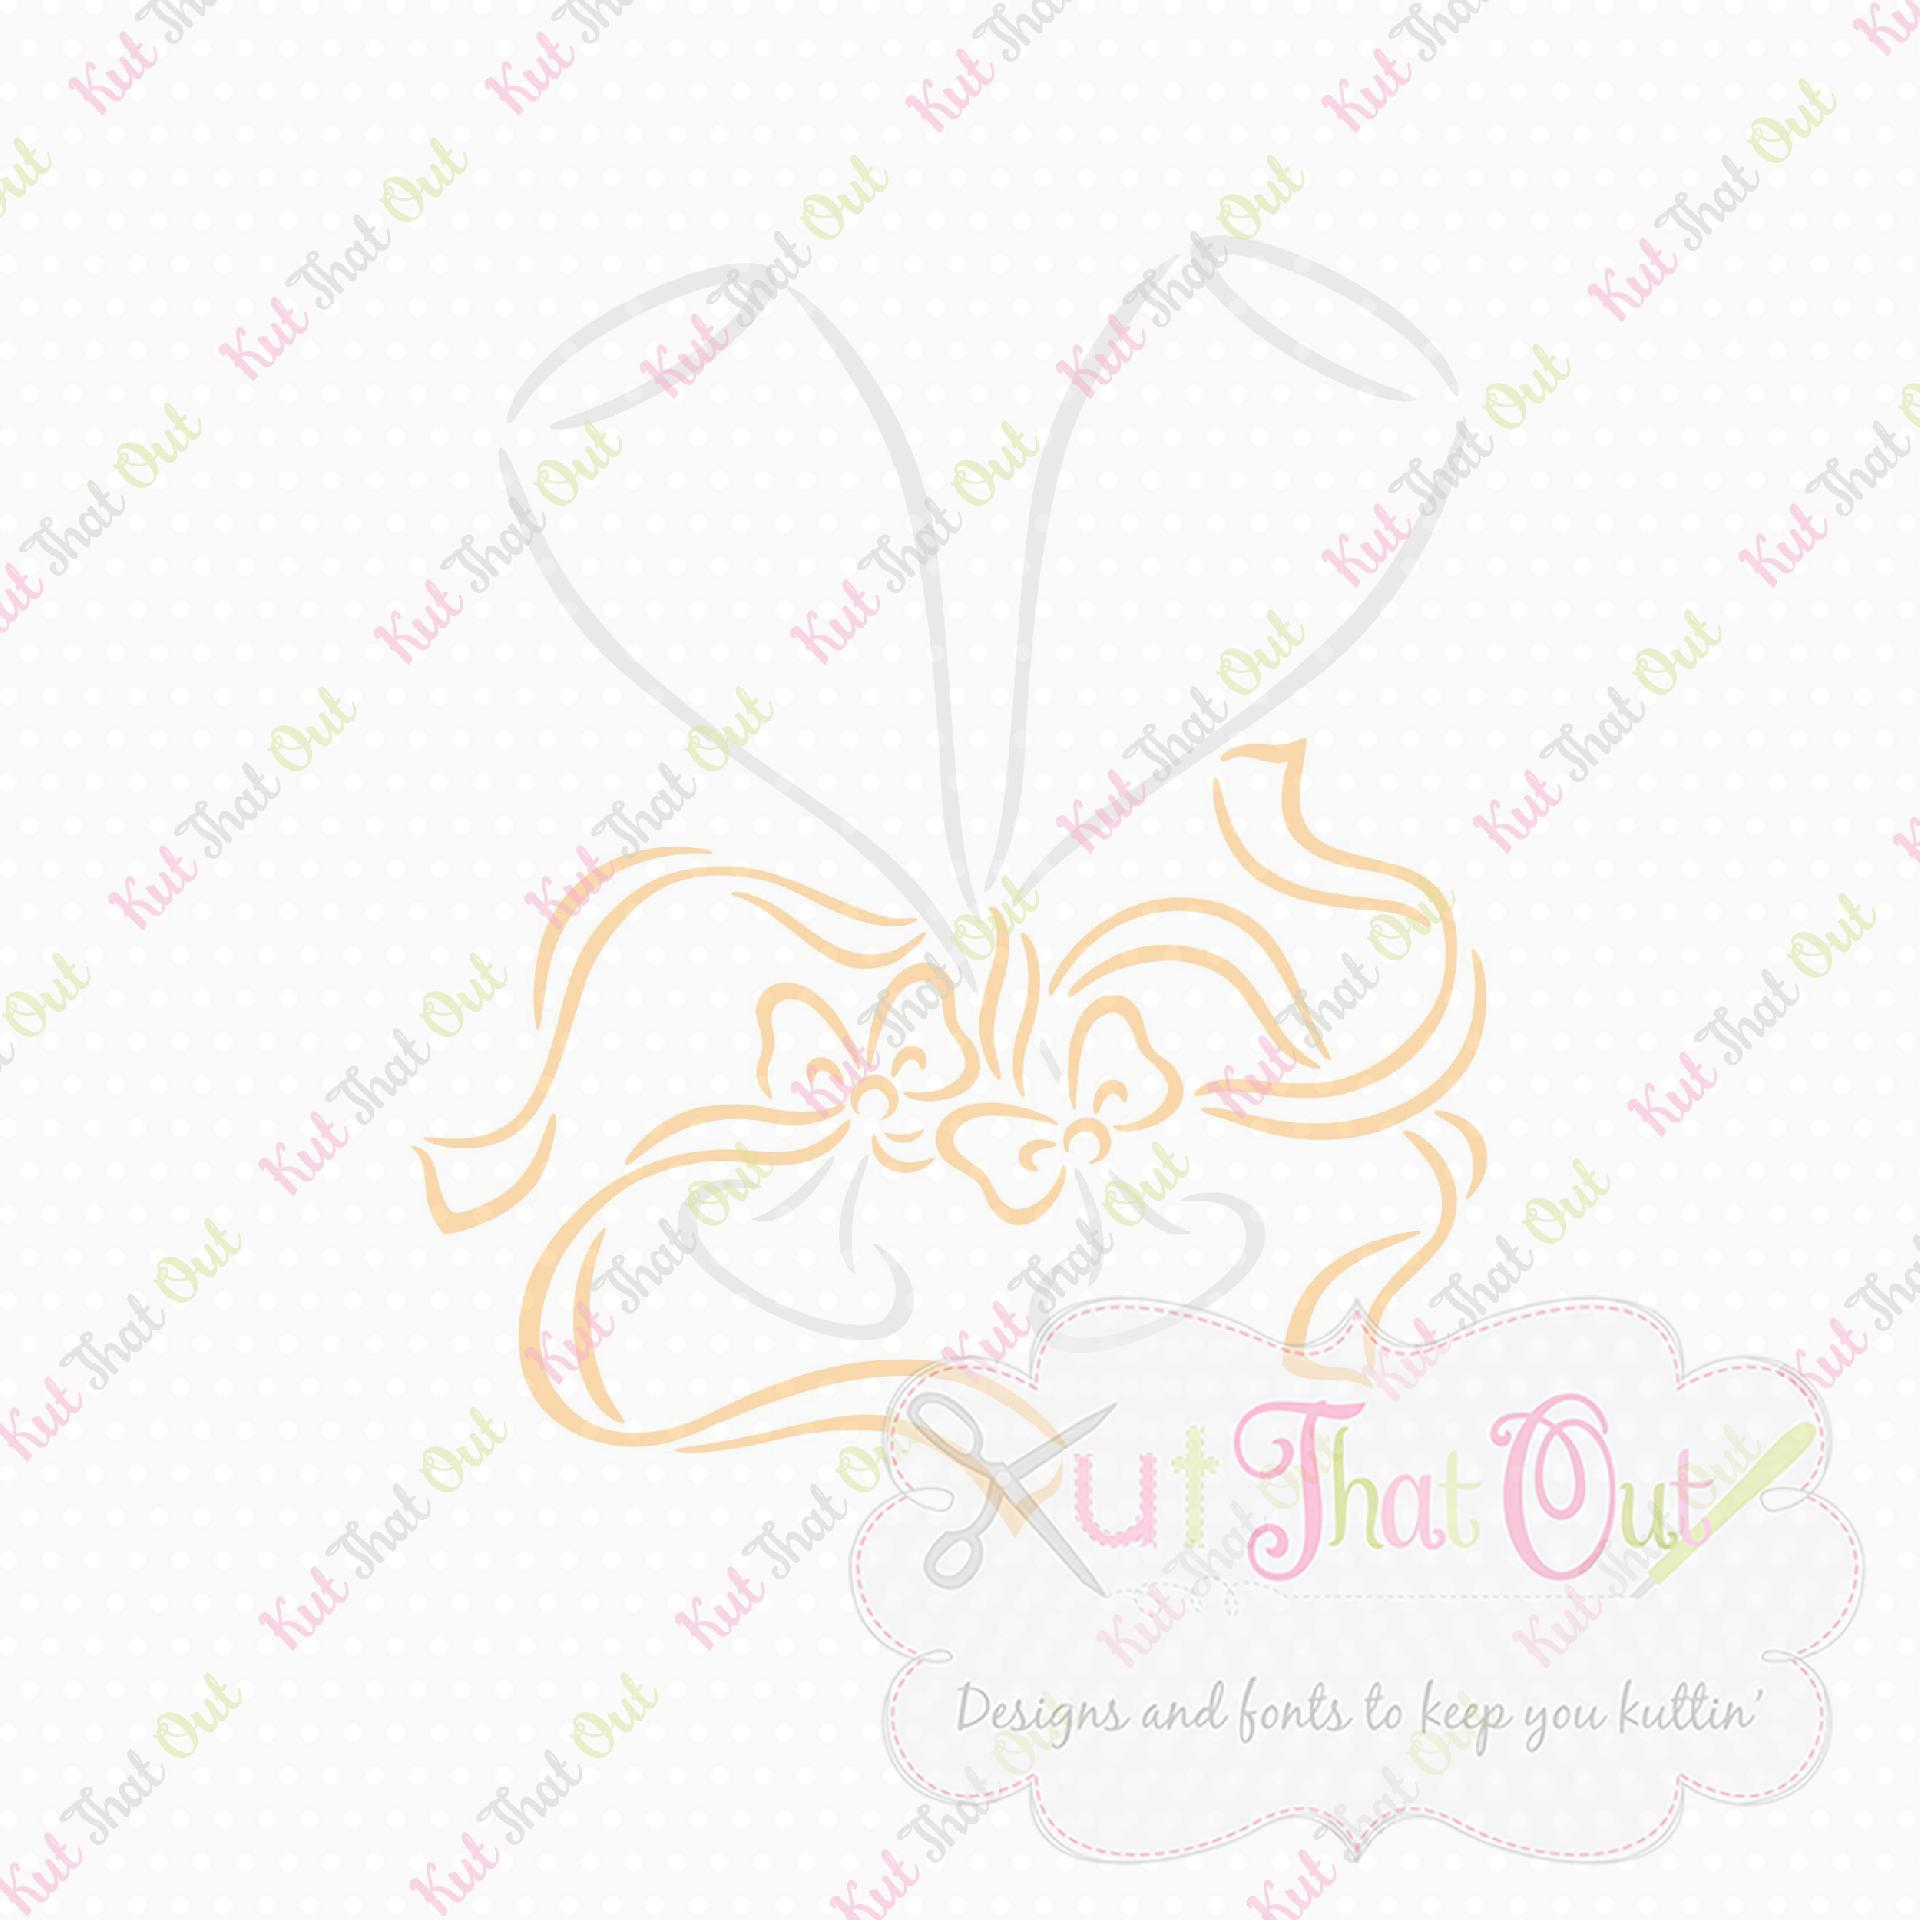 Download Wedding Champagne Glass Svg Dxf Cut File So Fontsy